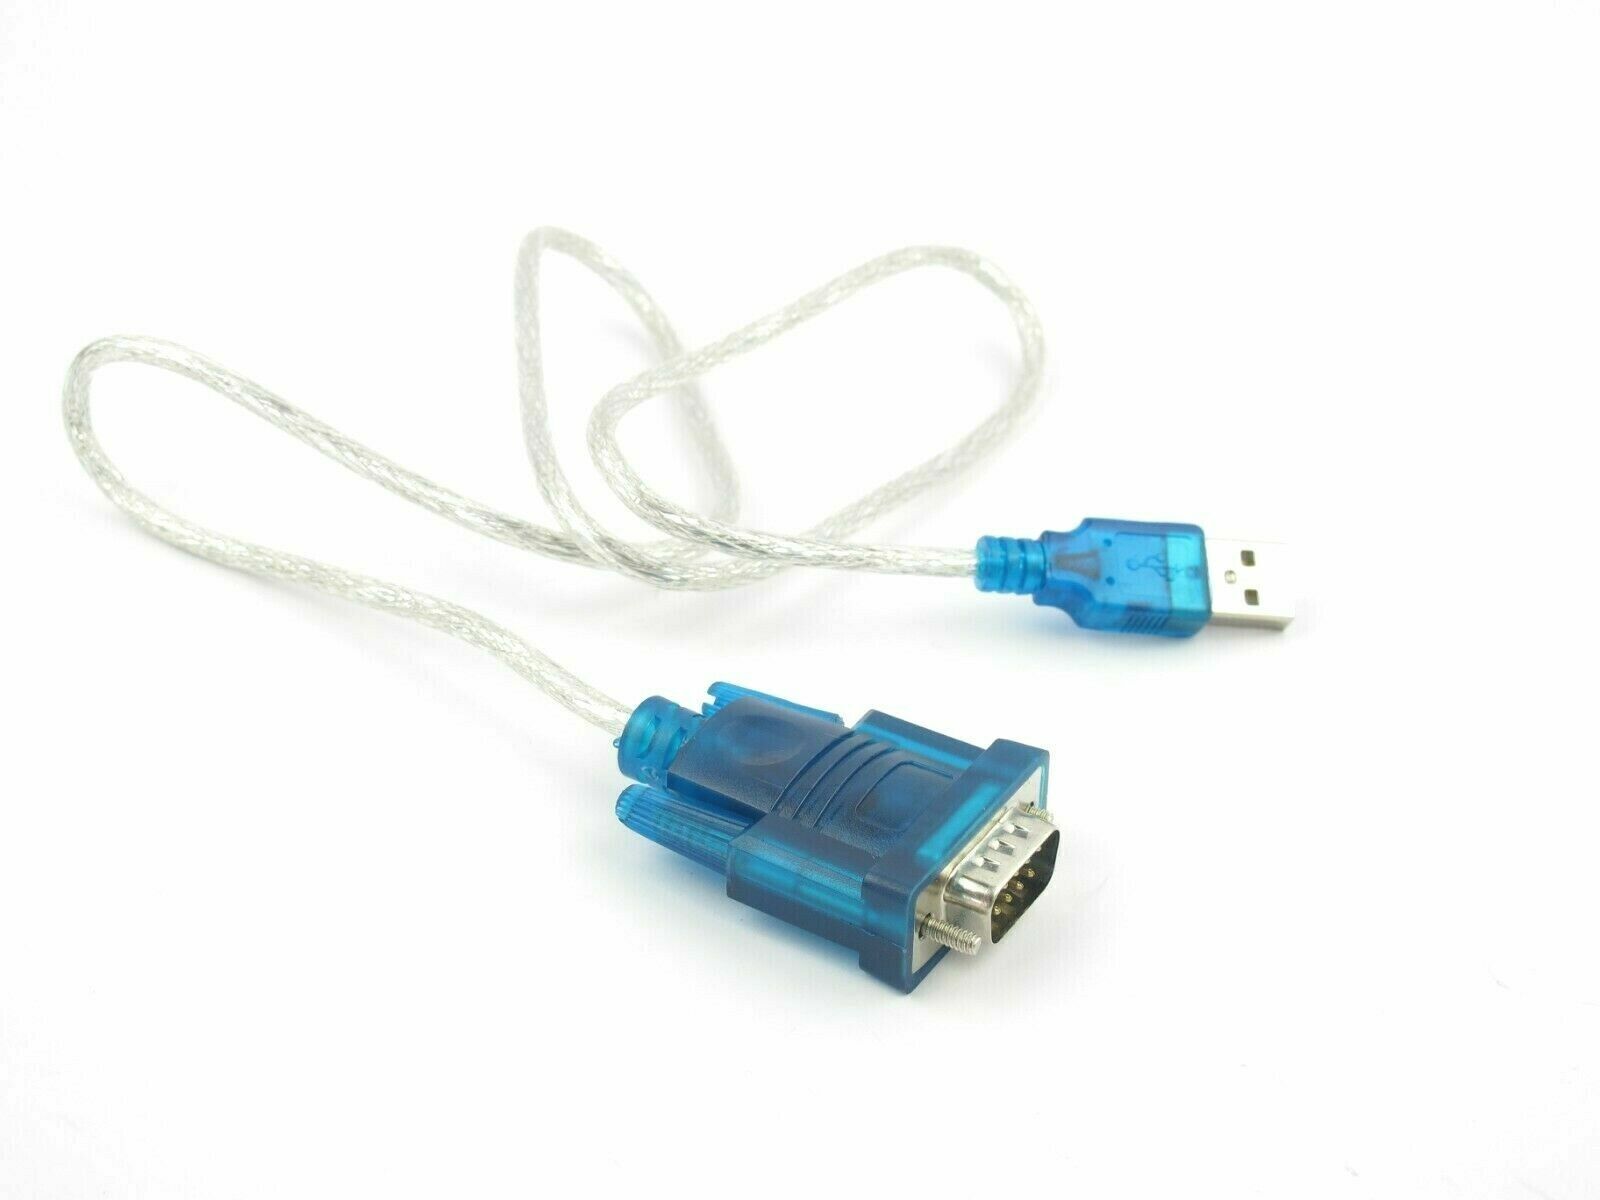 2 Pack USB 2.0 to RS232 Serial 9 Pin 9P DB9 Adapter Converter Cable Cord New Unbranded Does not apply - фотография #6